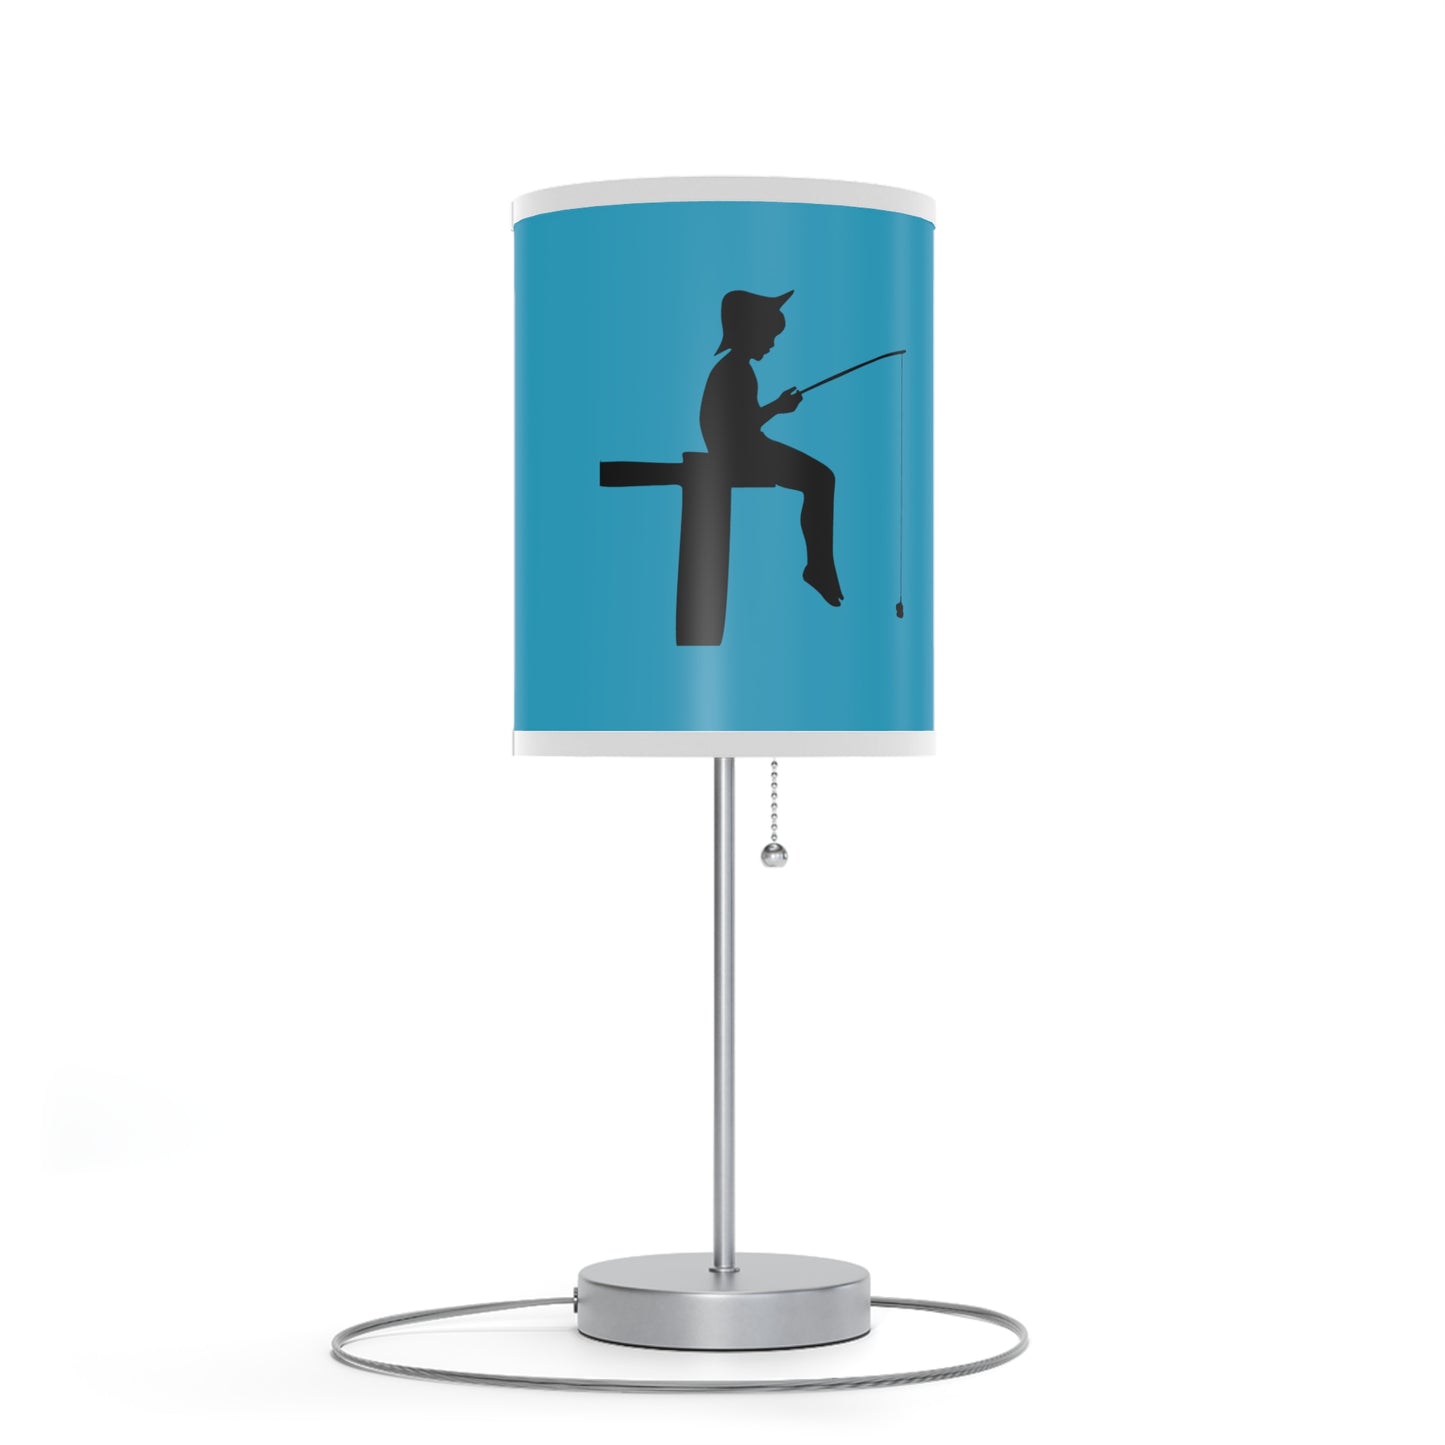 Lamp on a Stand, US|CA plug: Fishing Turquoise